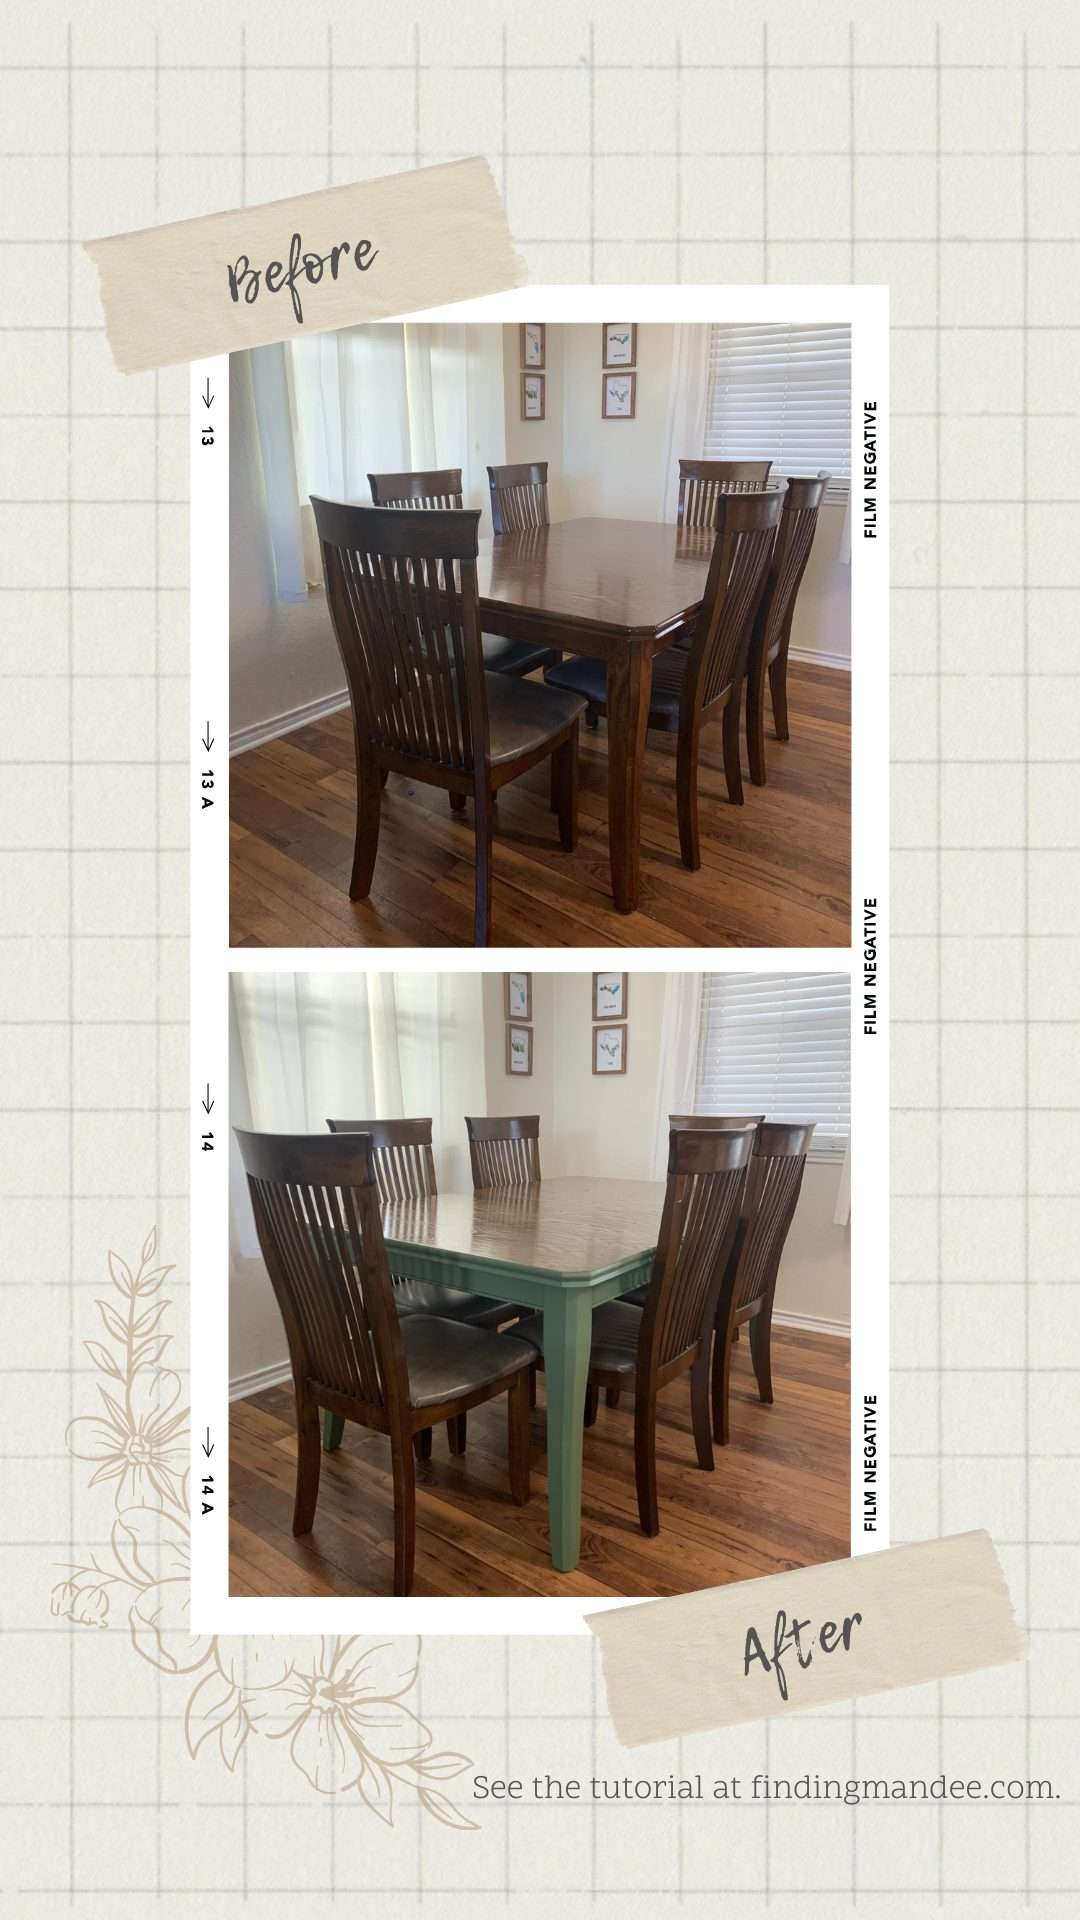 How to Paint a Dining Room Table: Before and After | Finding Mandee